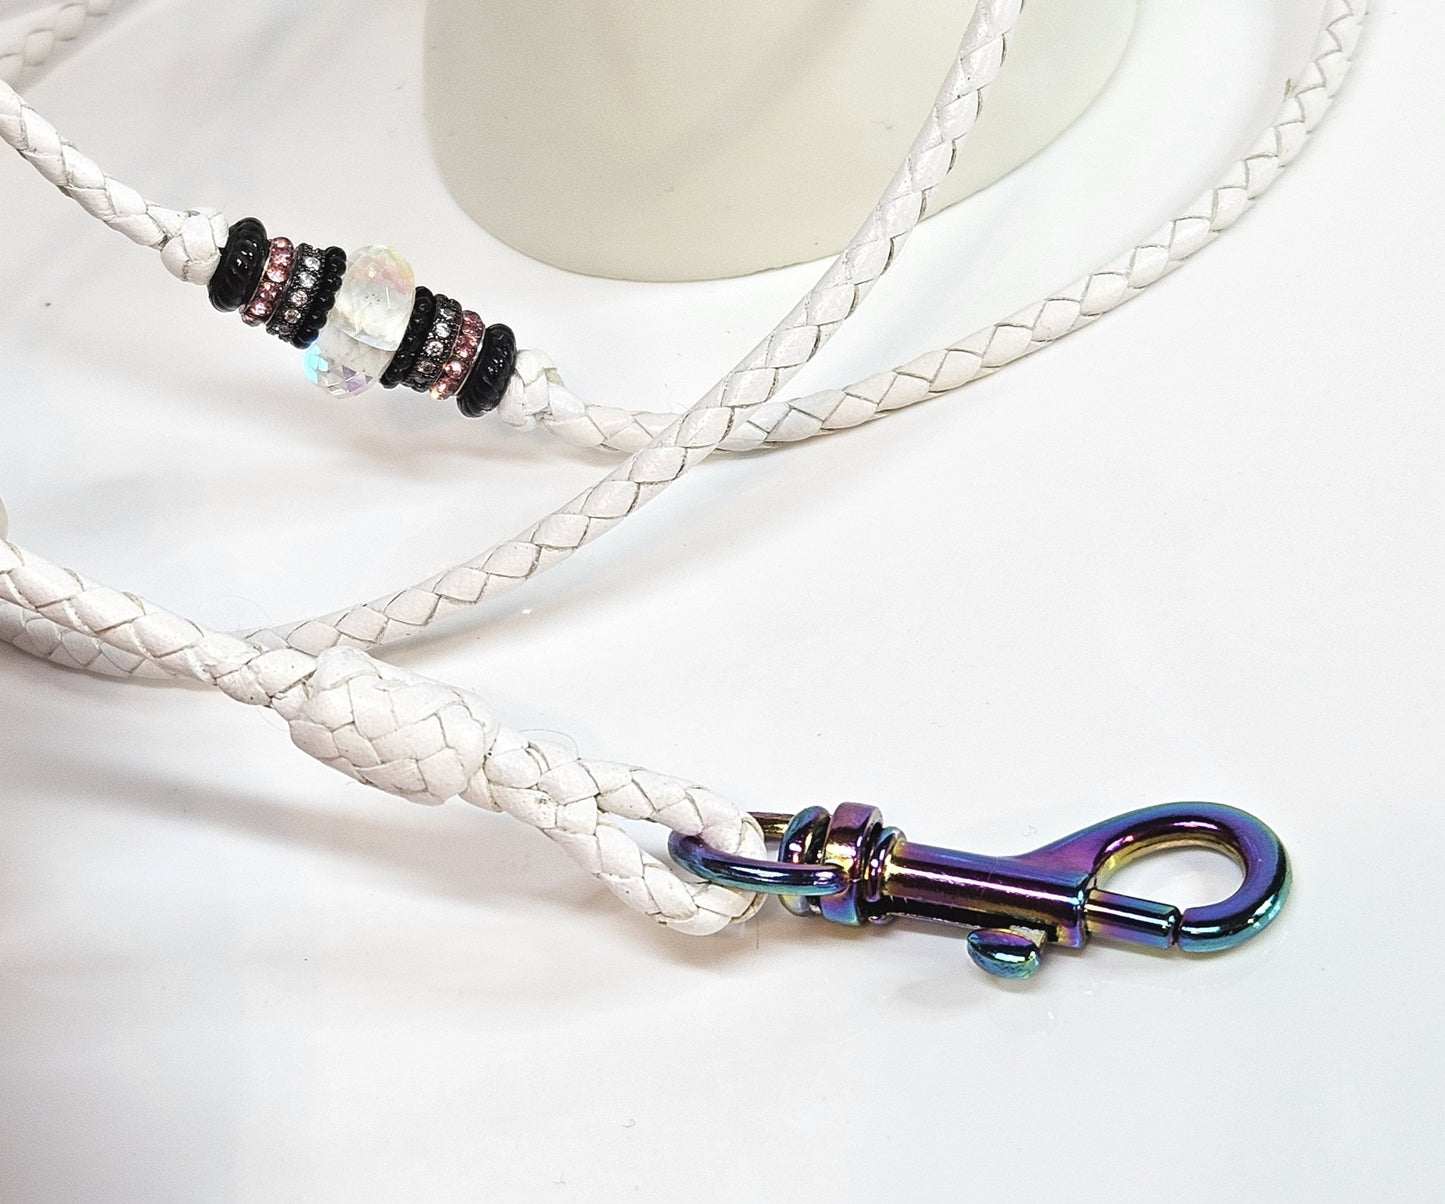 50" Snap Hook End Show Lead with matching Martingale Collar - Champion Show Leads